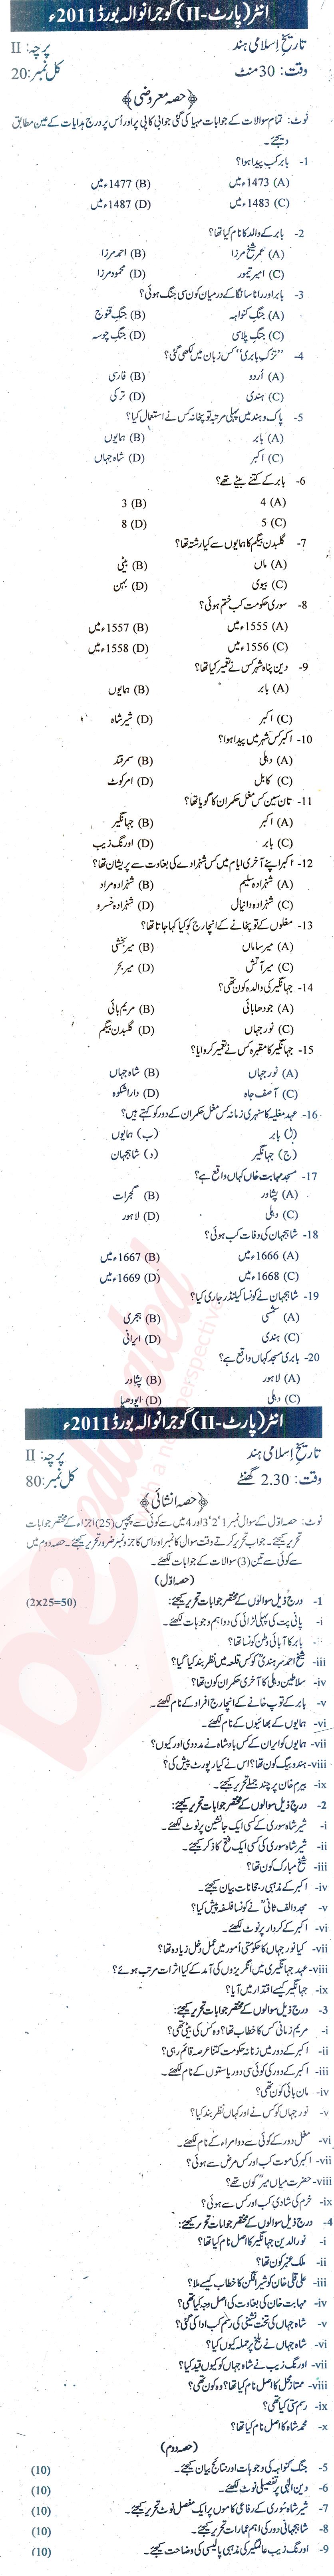 History Of Islamic India FA Part 2 Past Paper Group 1 BISE Gujranwala 2011